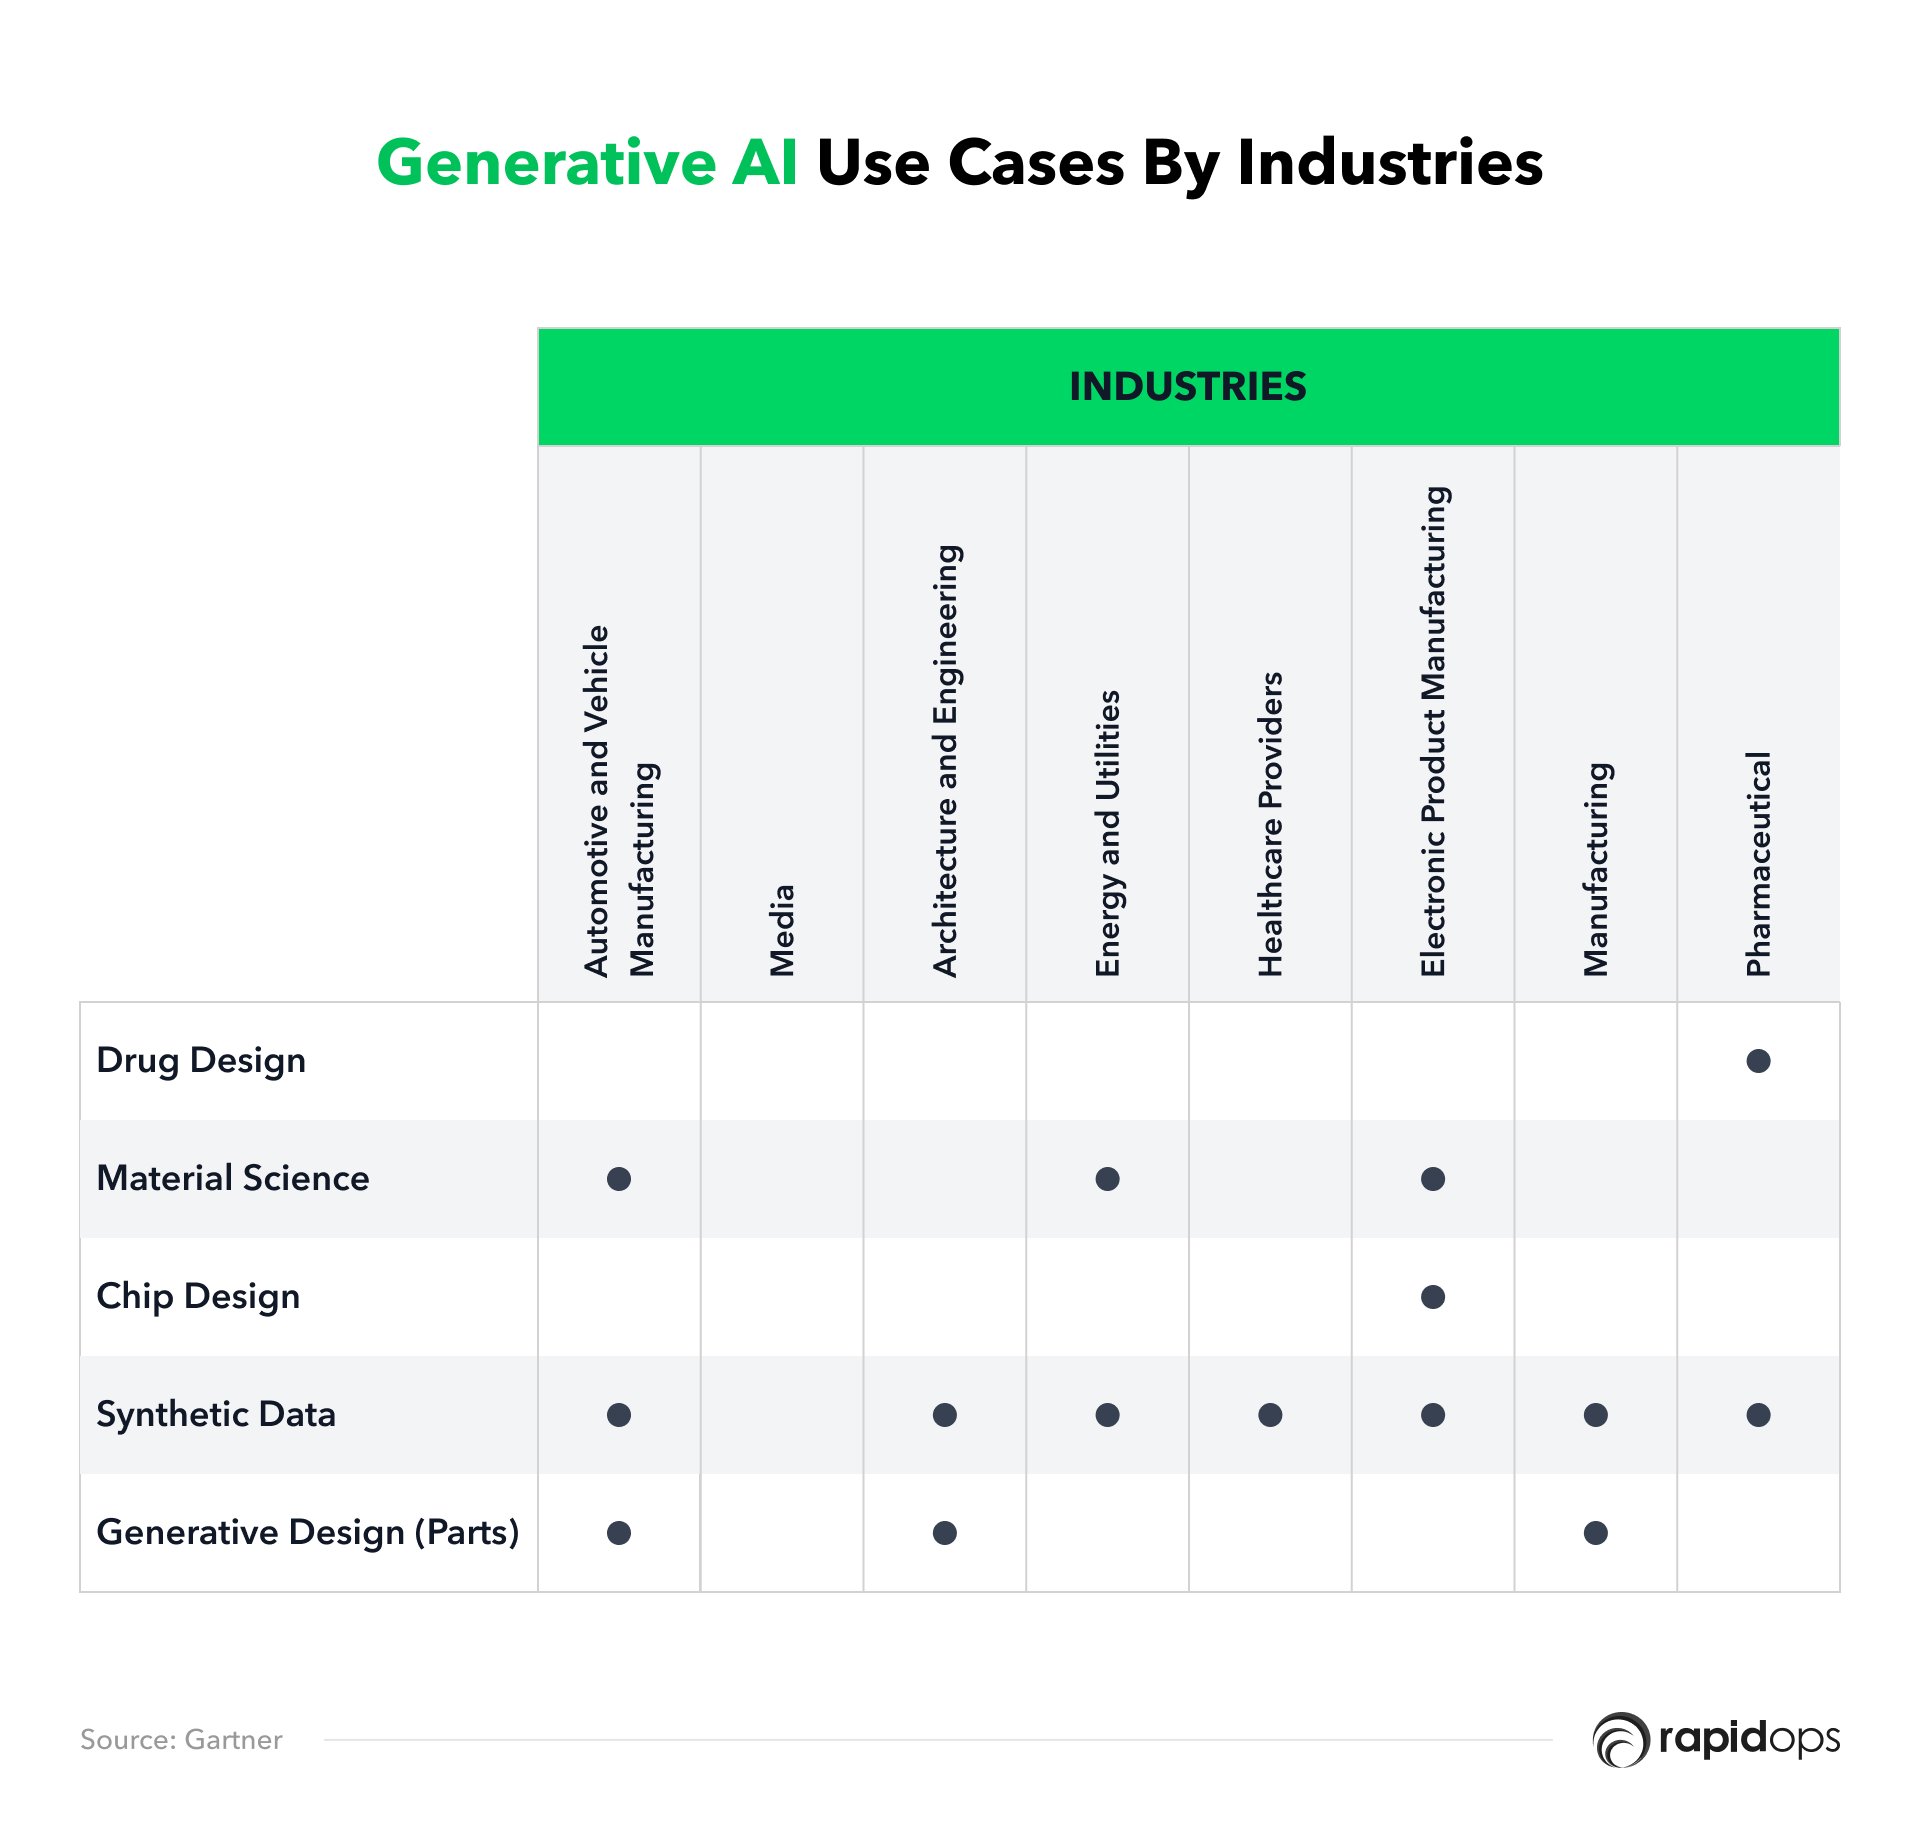 Generative AI Use Cases by Industries